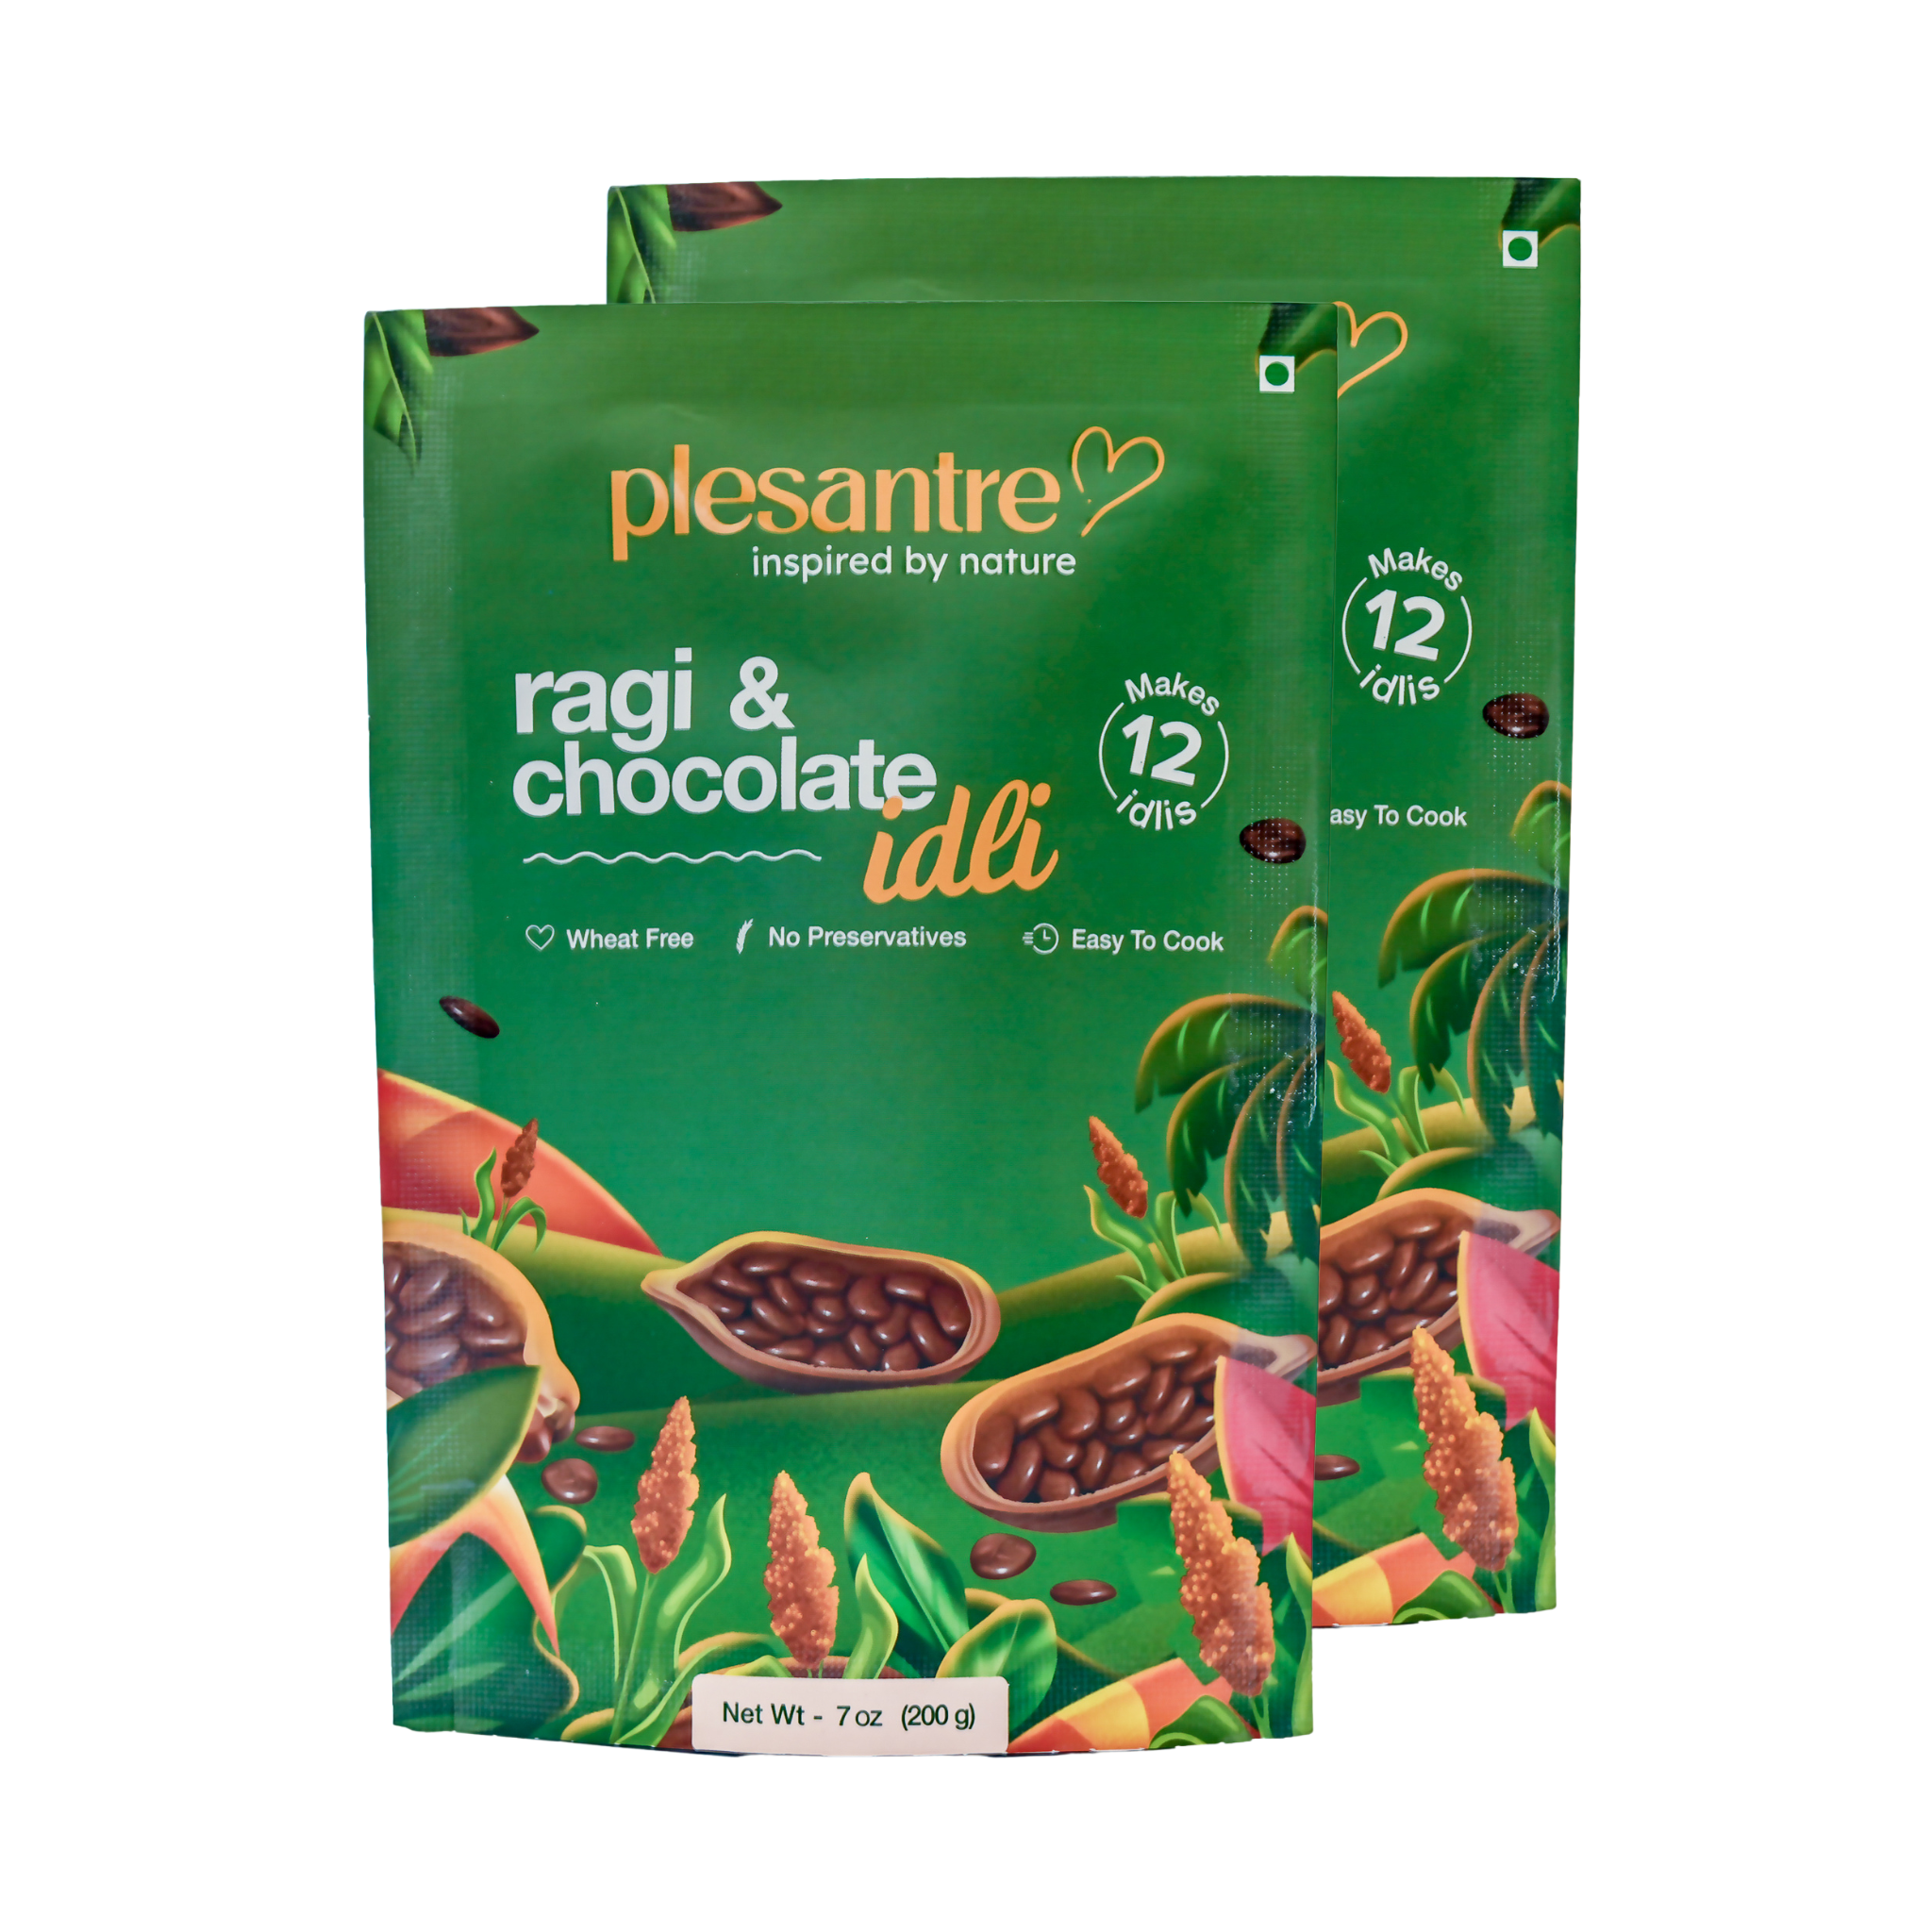 plesantre "Ragi & Chocolate Idli" Instant Idly Batter - Yummy, Healthy & Nutritious Breakfast Premix for You & Your Kids - Wheat Free, Finger Millet Grains, Cocoa, Jaggery - Pack of 2, Makes 24 Idlies